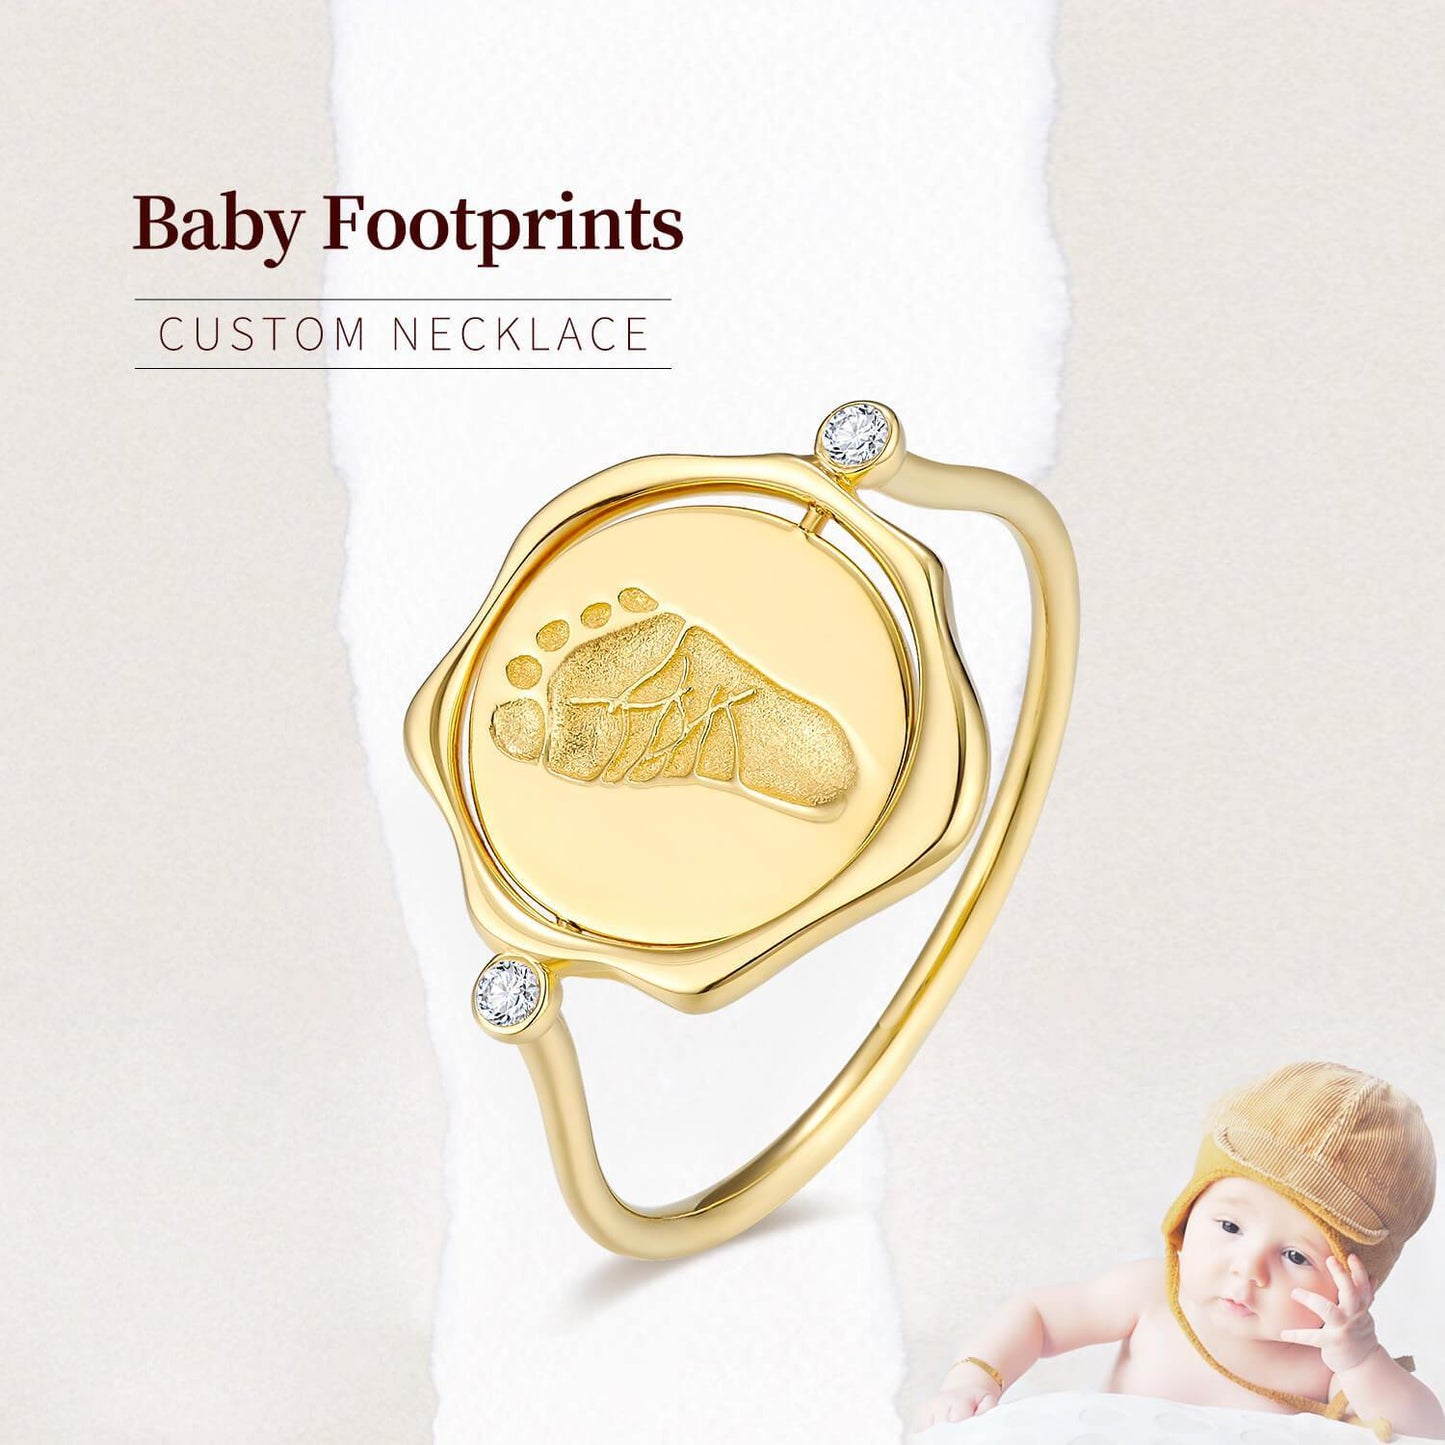 Baby and custom 18k gold baby footprints fire lacquer seal ring